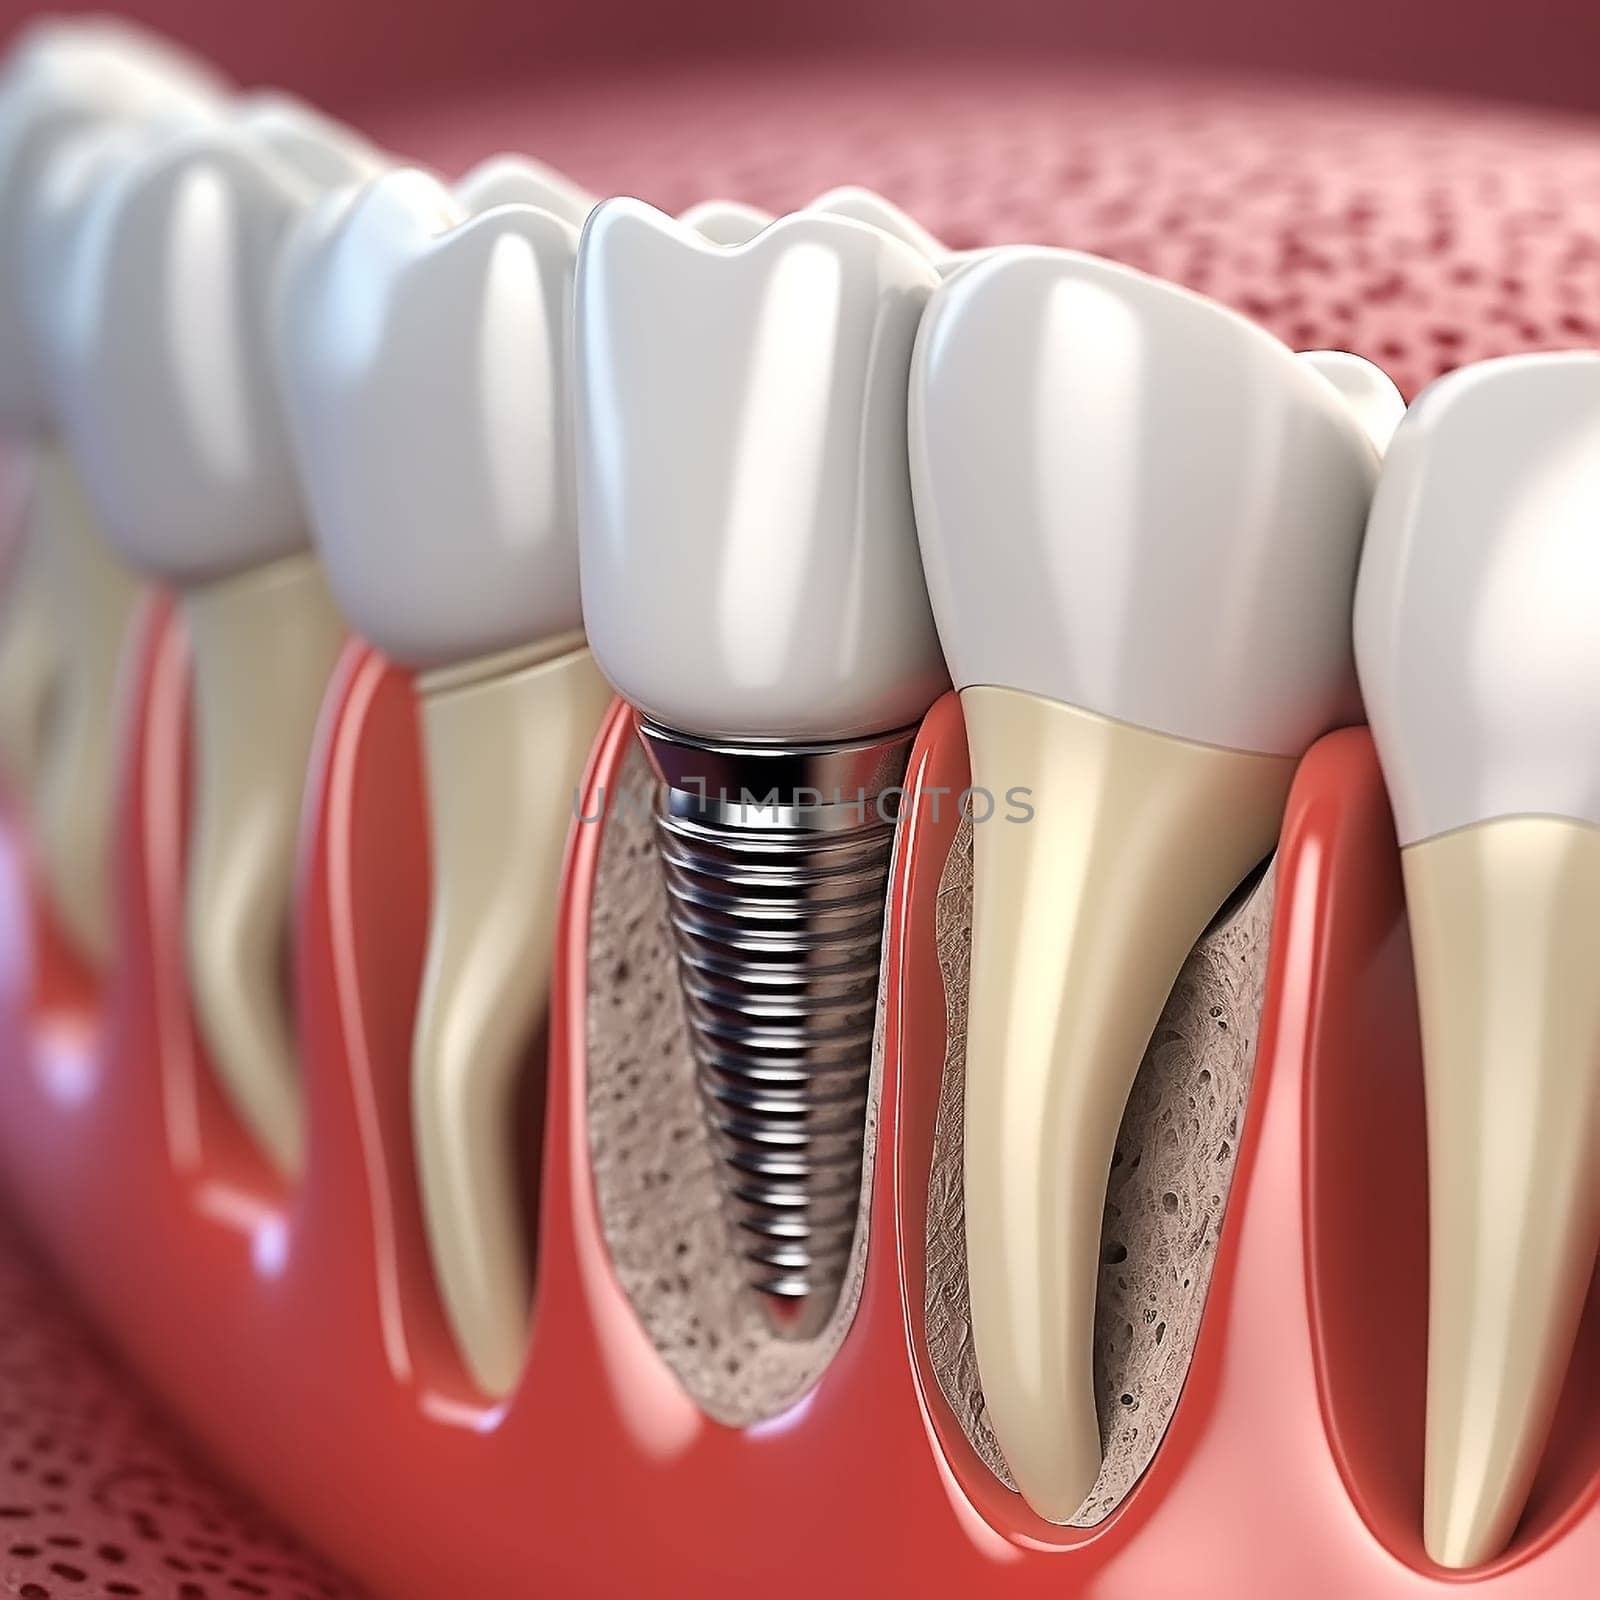 Periimplantitis with visible bone damage. Medically accurate 3D illustration of dental implants concept.